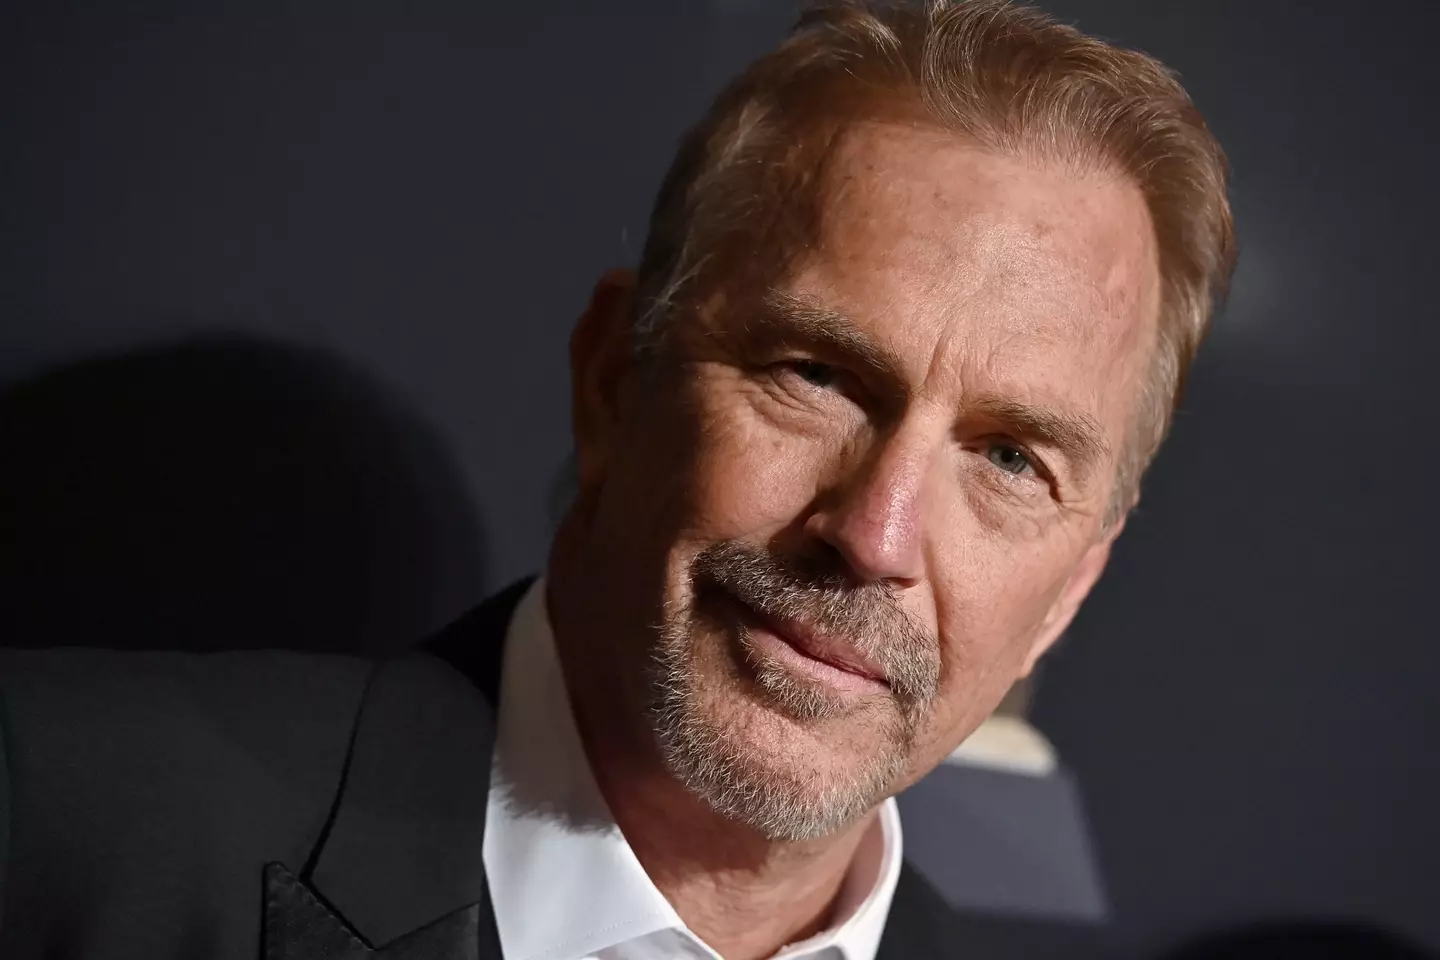 Kevin Costner has broken his silence after winning the difficult child support battle.